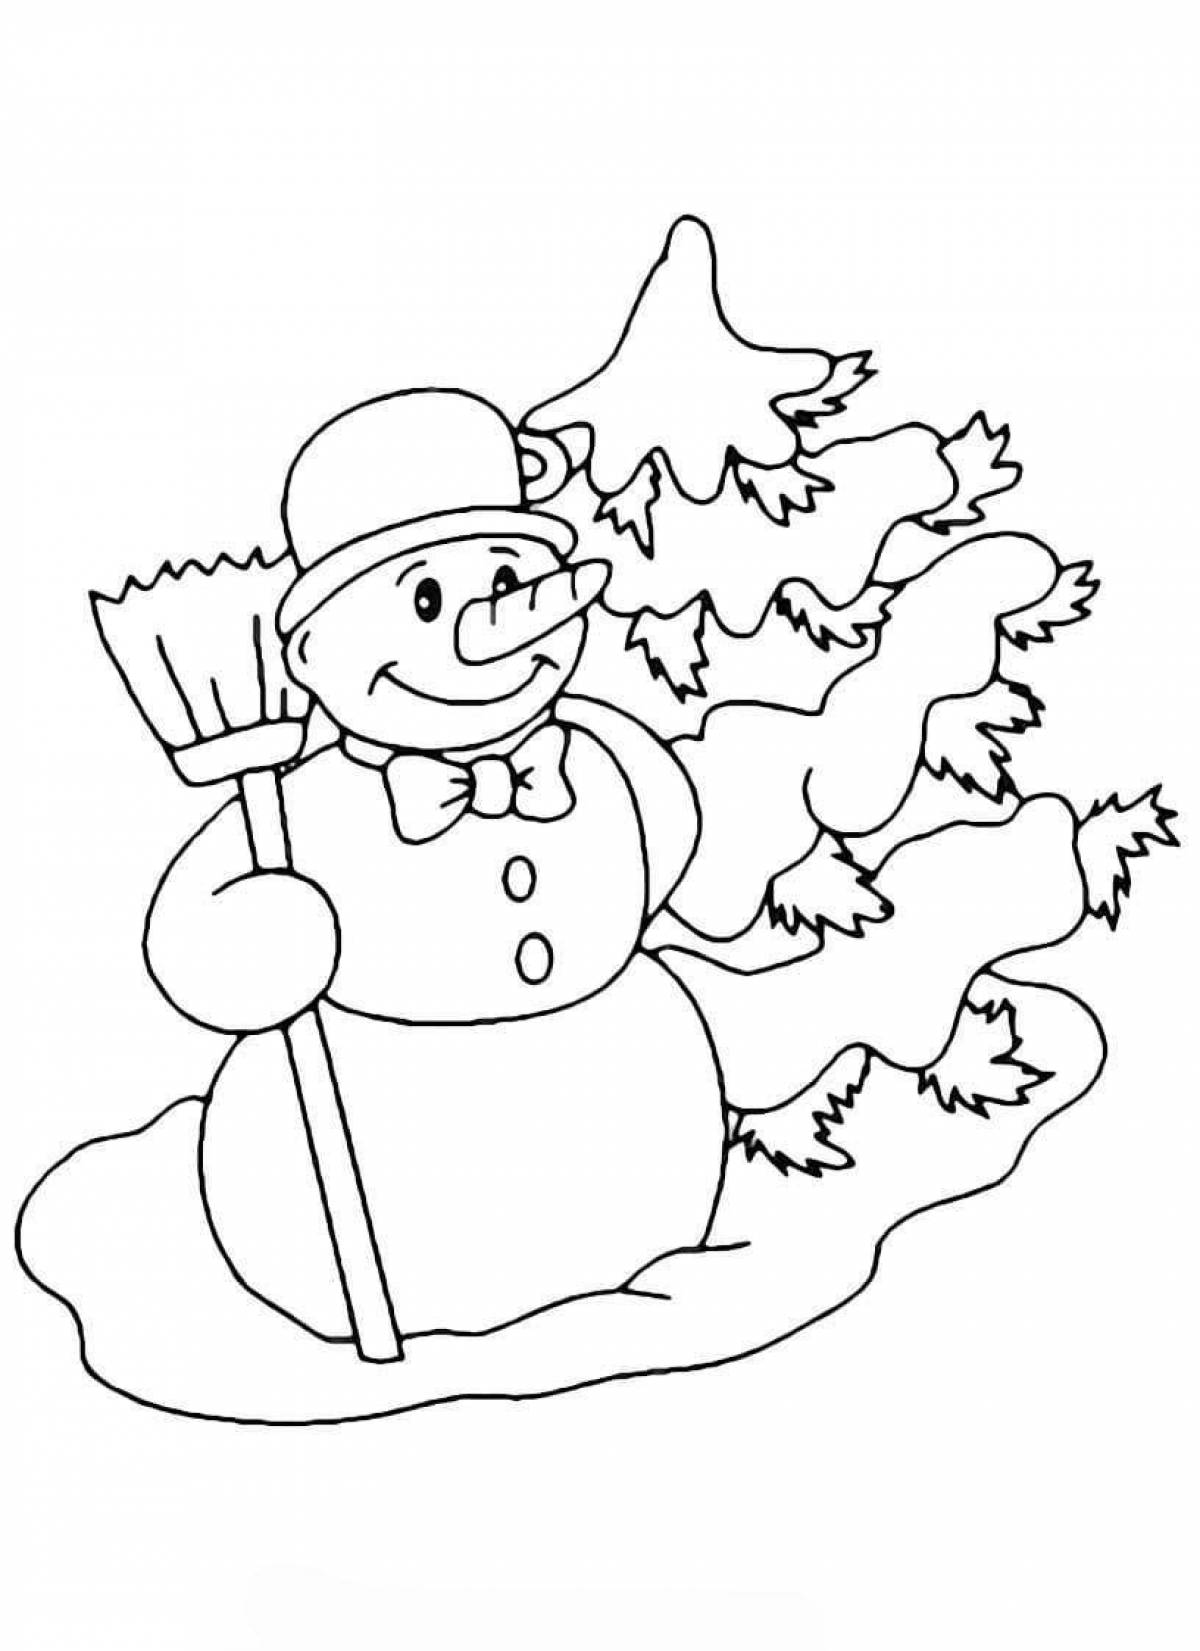 Live coloring snowman for children 4-5 years old